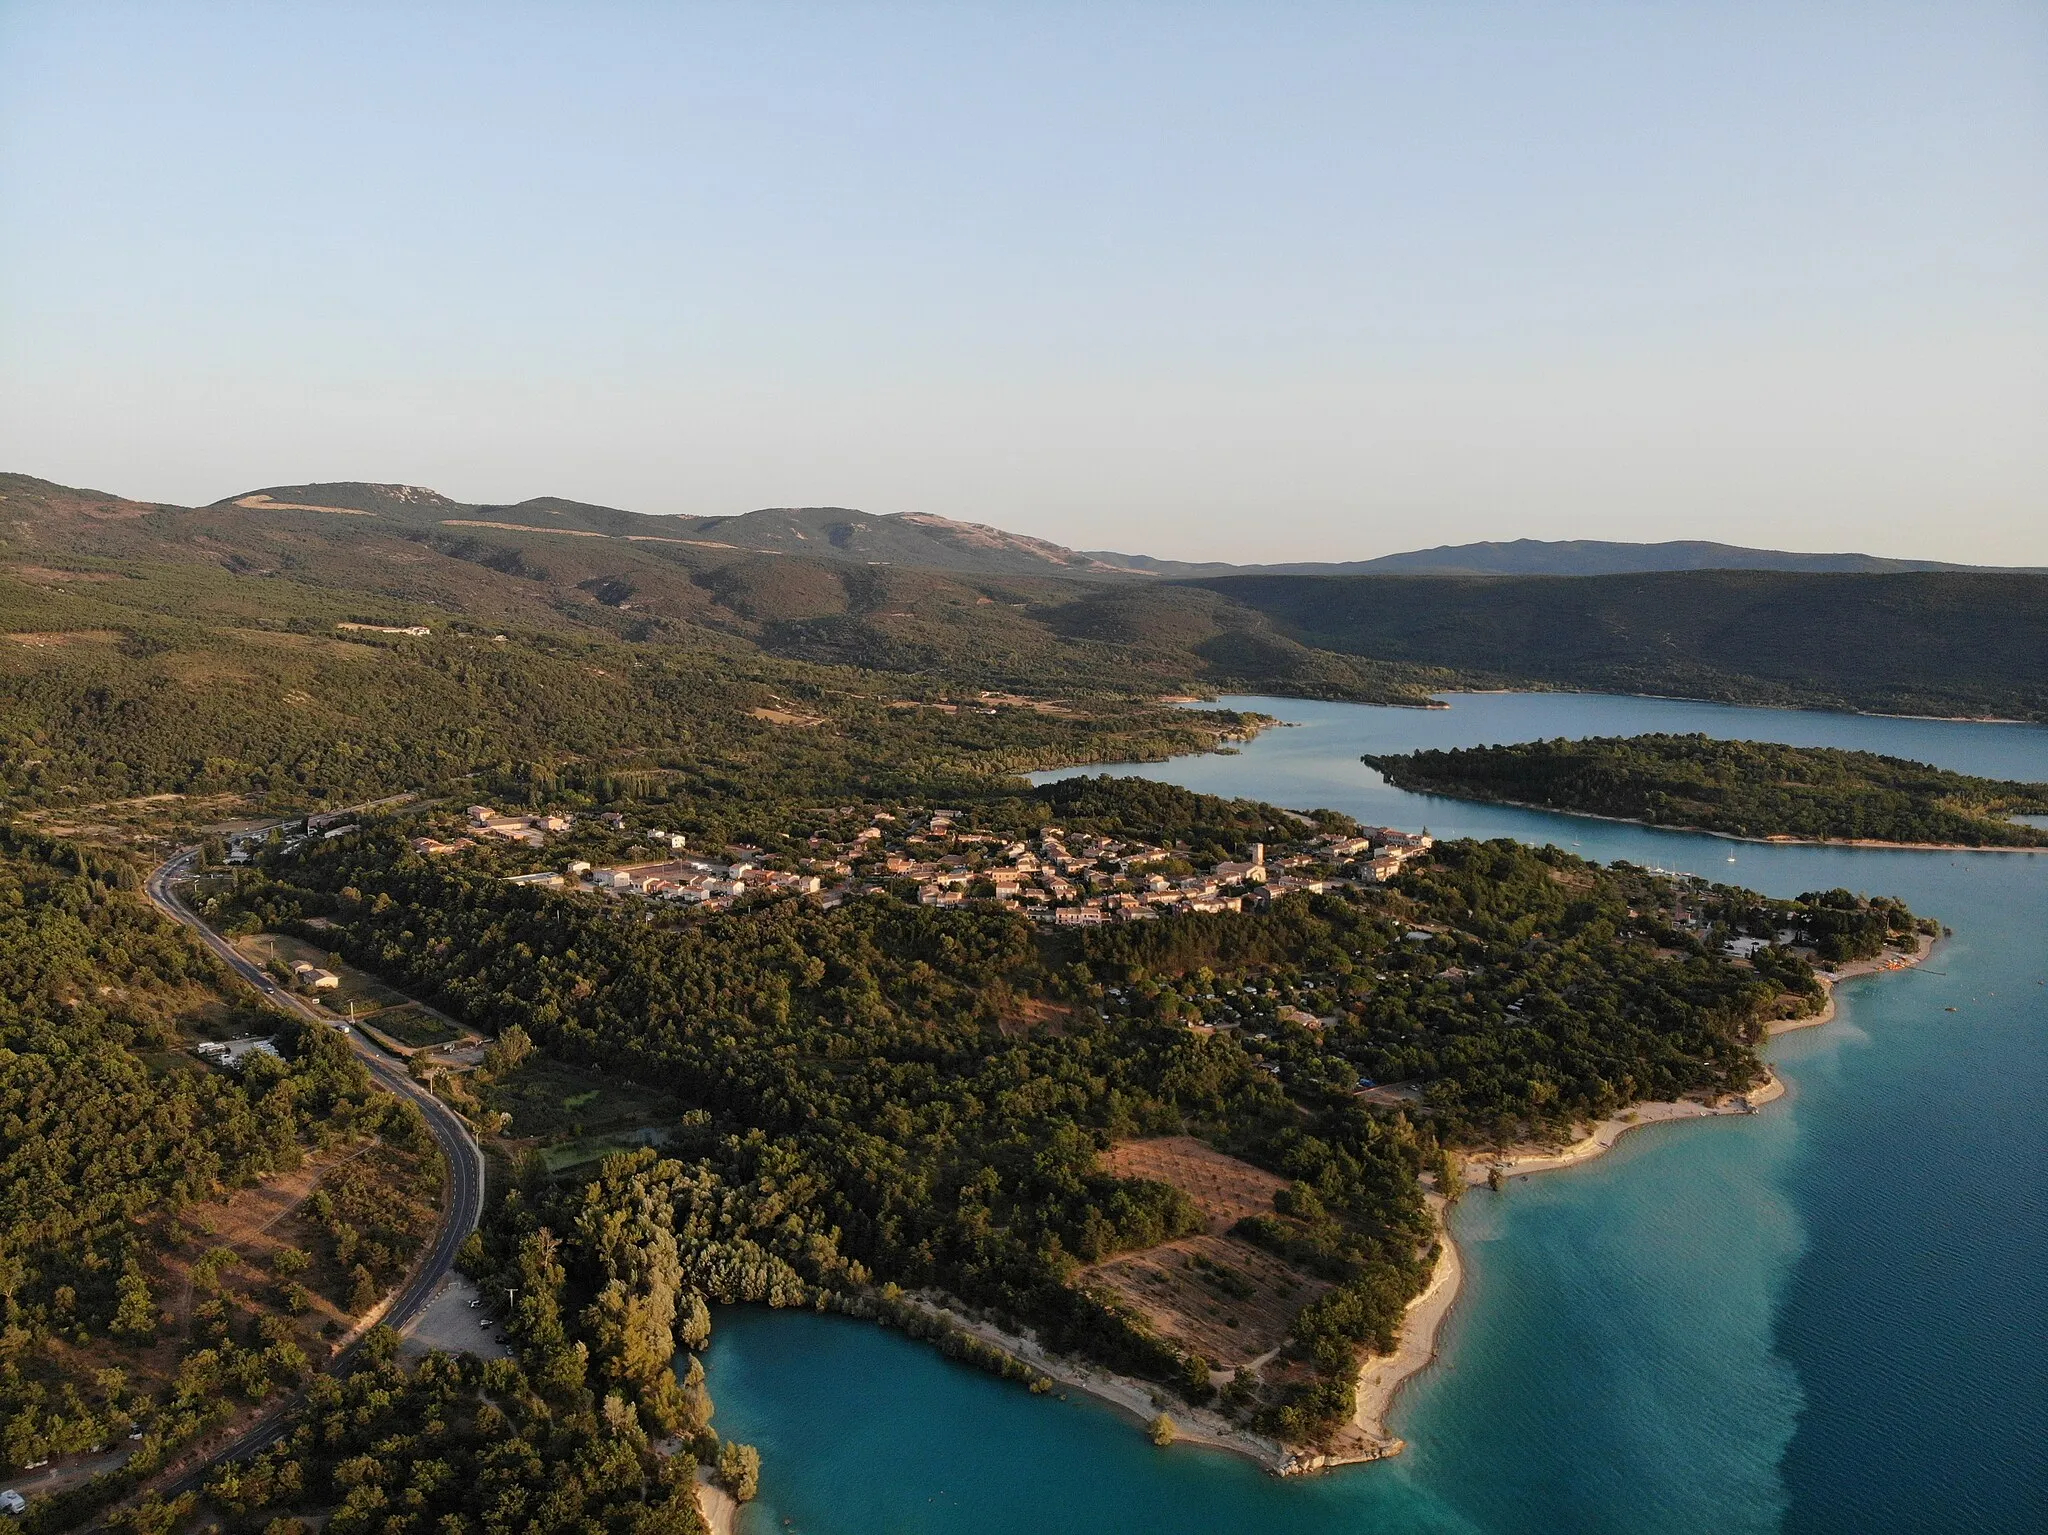 Photo showing: Aerial photograph of Les Salles-sur-Verdon, France; view looking south from above the lake